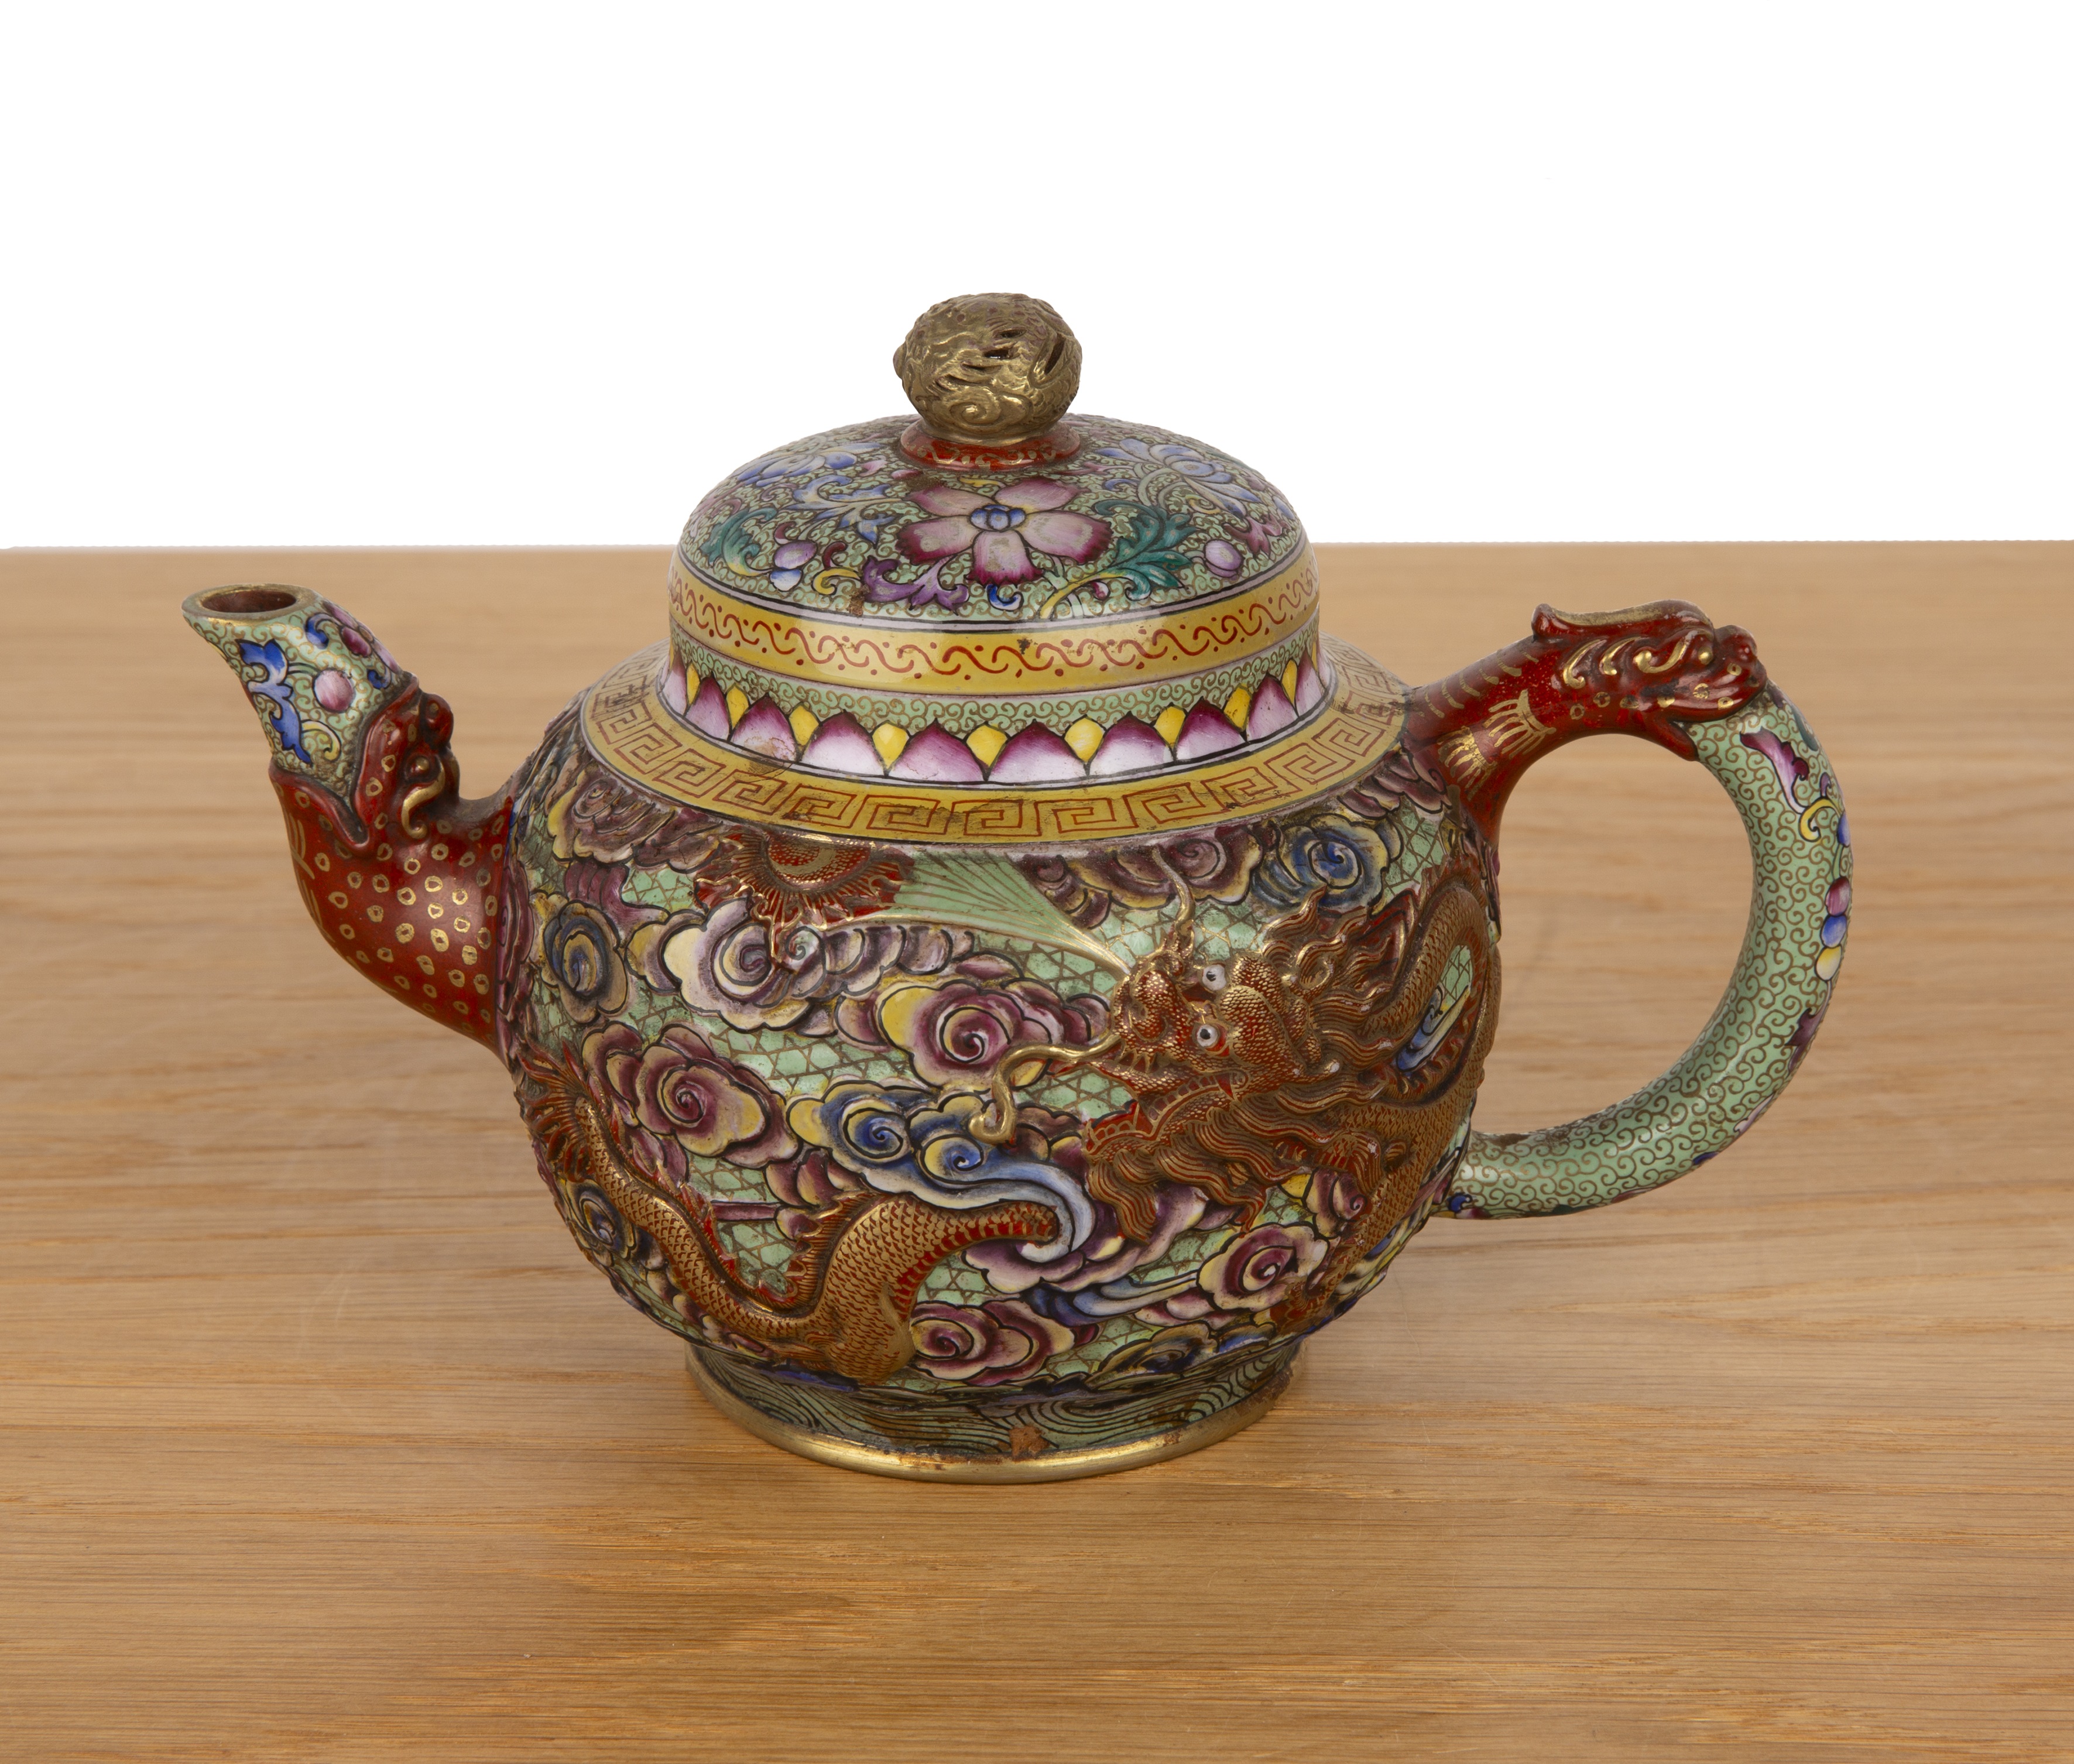 Yixing teapot with enamelled decoration Chinese decorated with dragons around the body, a key border - Image 2 of 4